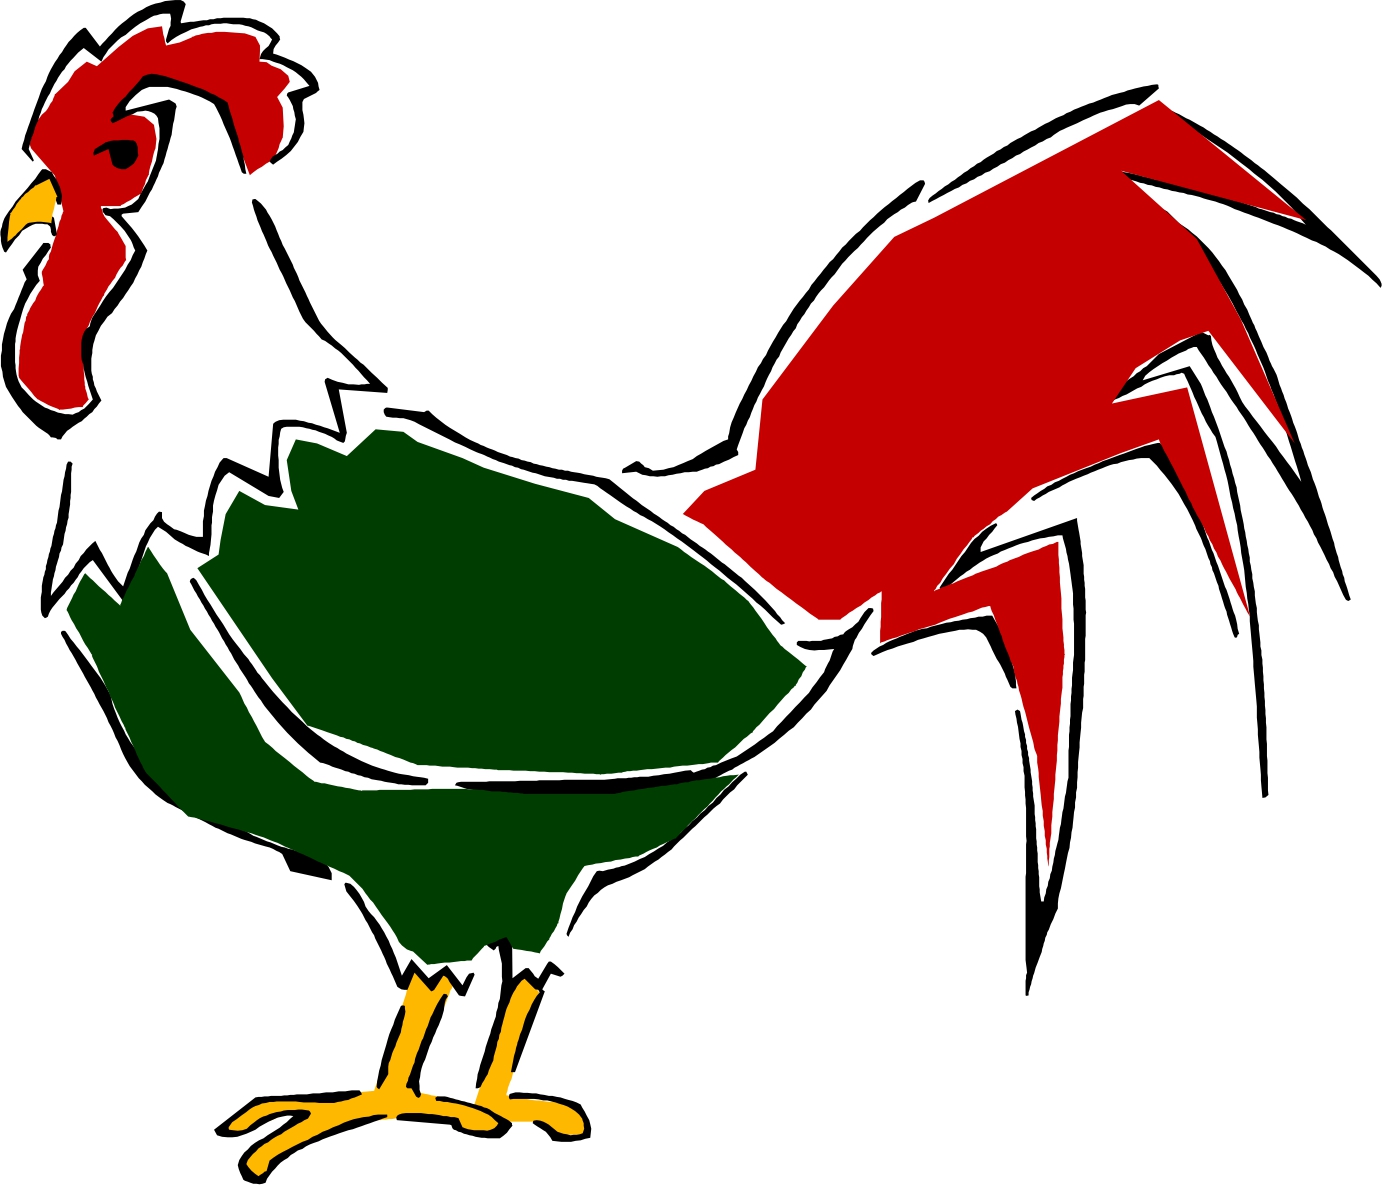 Rooster Cartoon Images - ClipArt Best